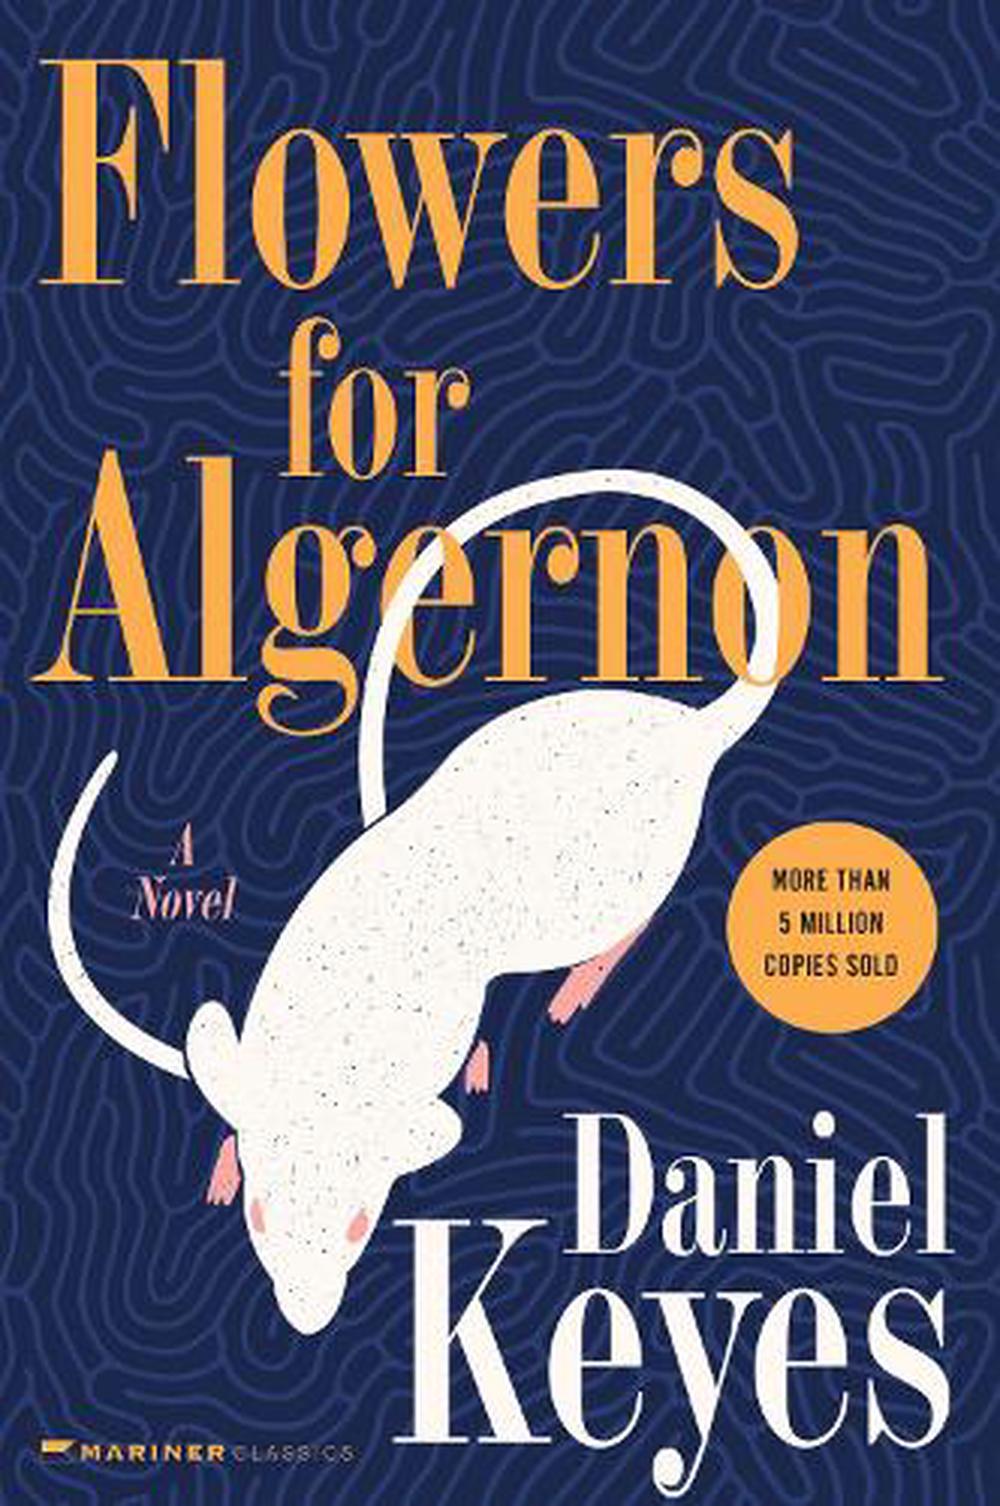 Flowers for Algernon by Daniel Keyes (English) Hardcover Book Free ...
